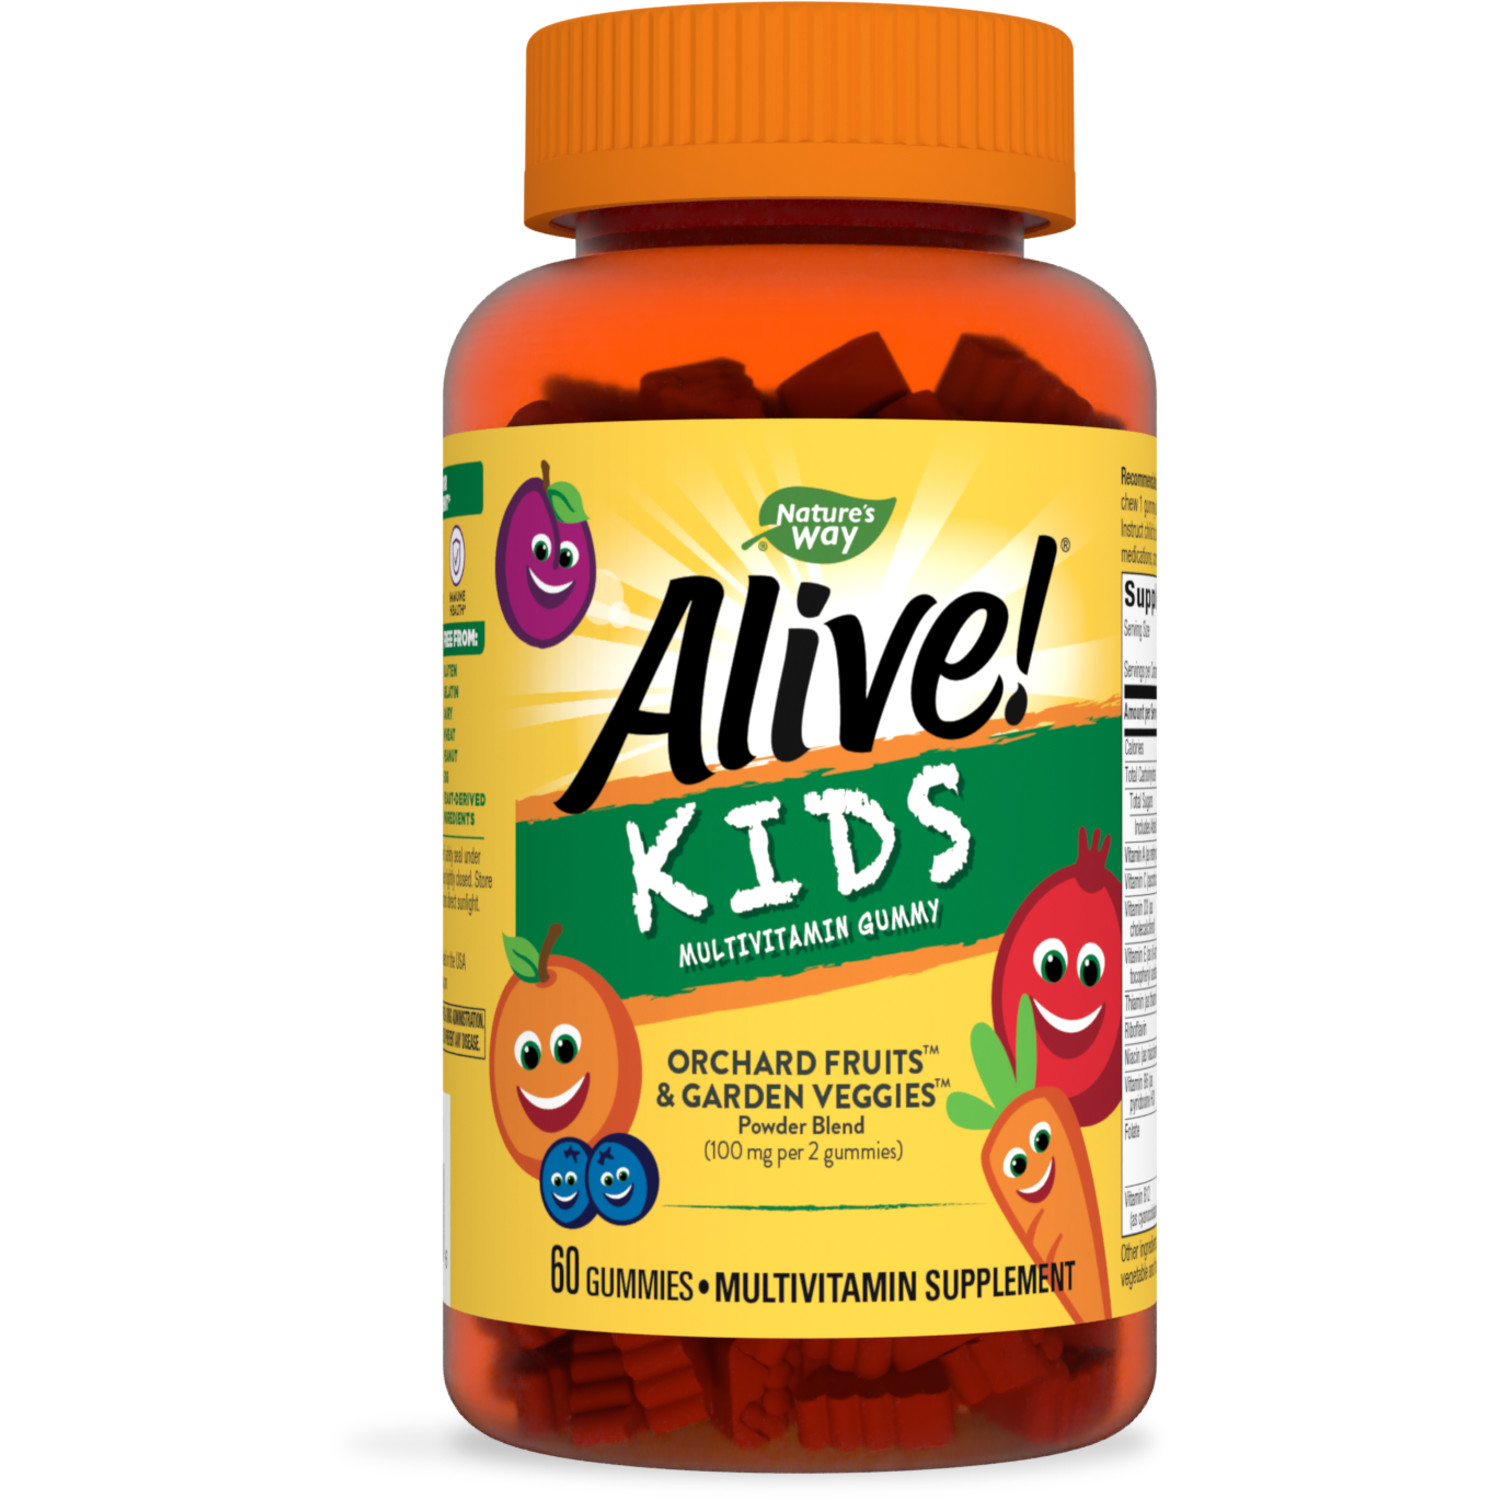 Alive! Kid's Daily Multivitamin Gummies, Supports Growth and Development*, Fruit Flavored, 60 Count - image 1 of 8